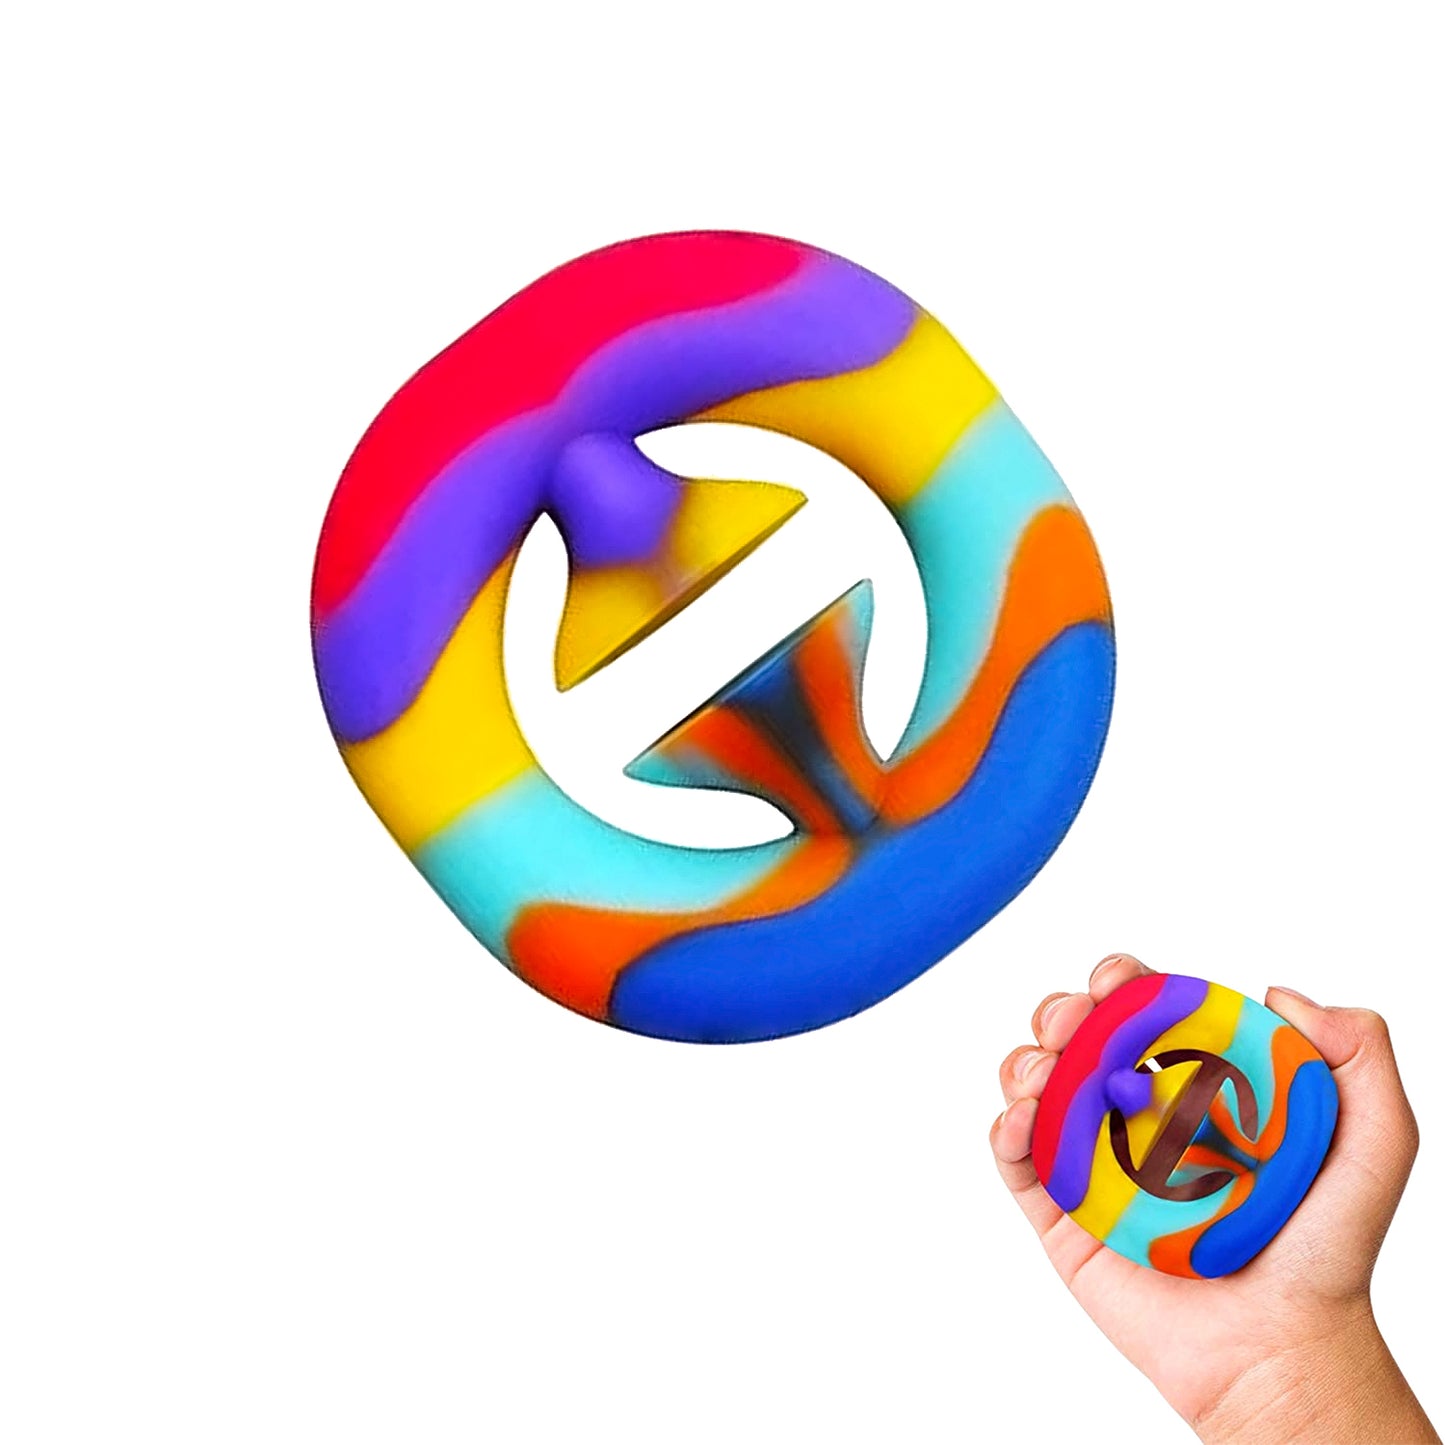 PATPAT Fidget Toys Pop It Grip Strength Device Stress Relief Sensory Hand Toy Anti-Anxiety Squeeze Click Finger Anxiety Relief Toys Silicone Grip Toy for Kids and Adults (Rainbow) (Rainbow)